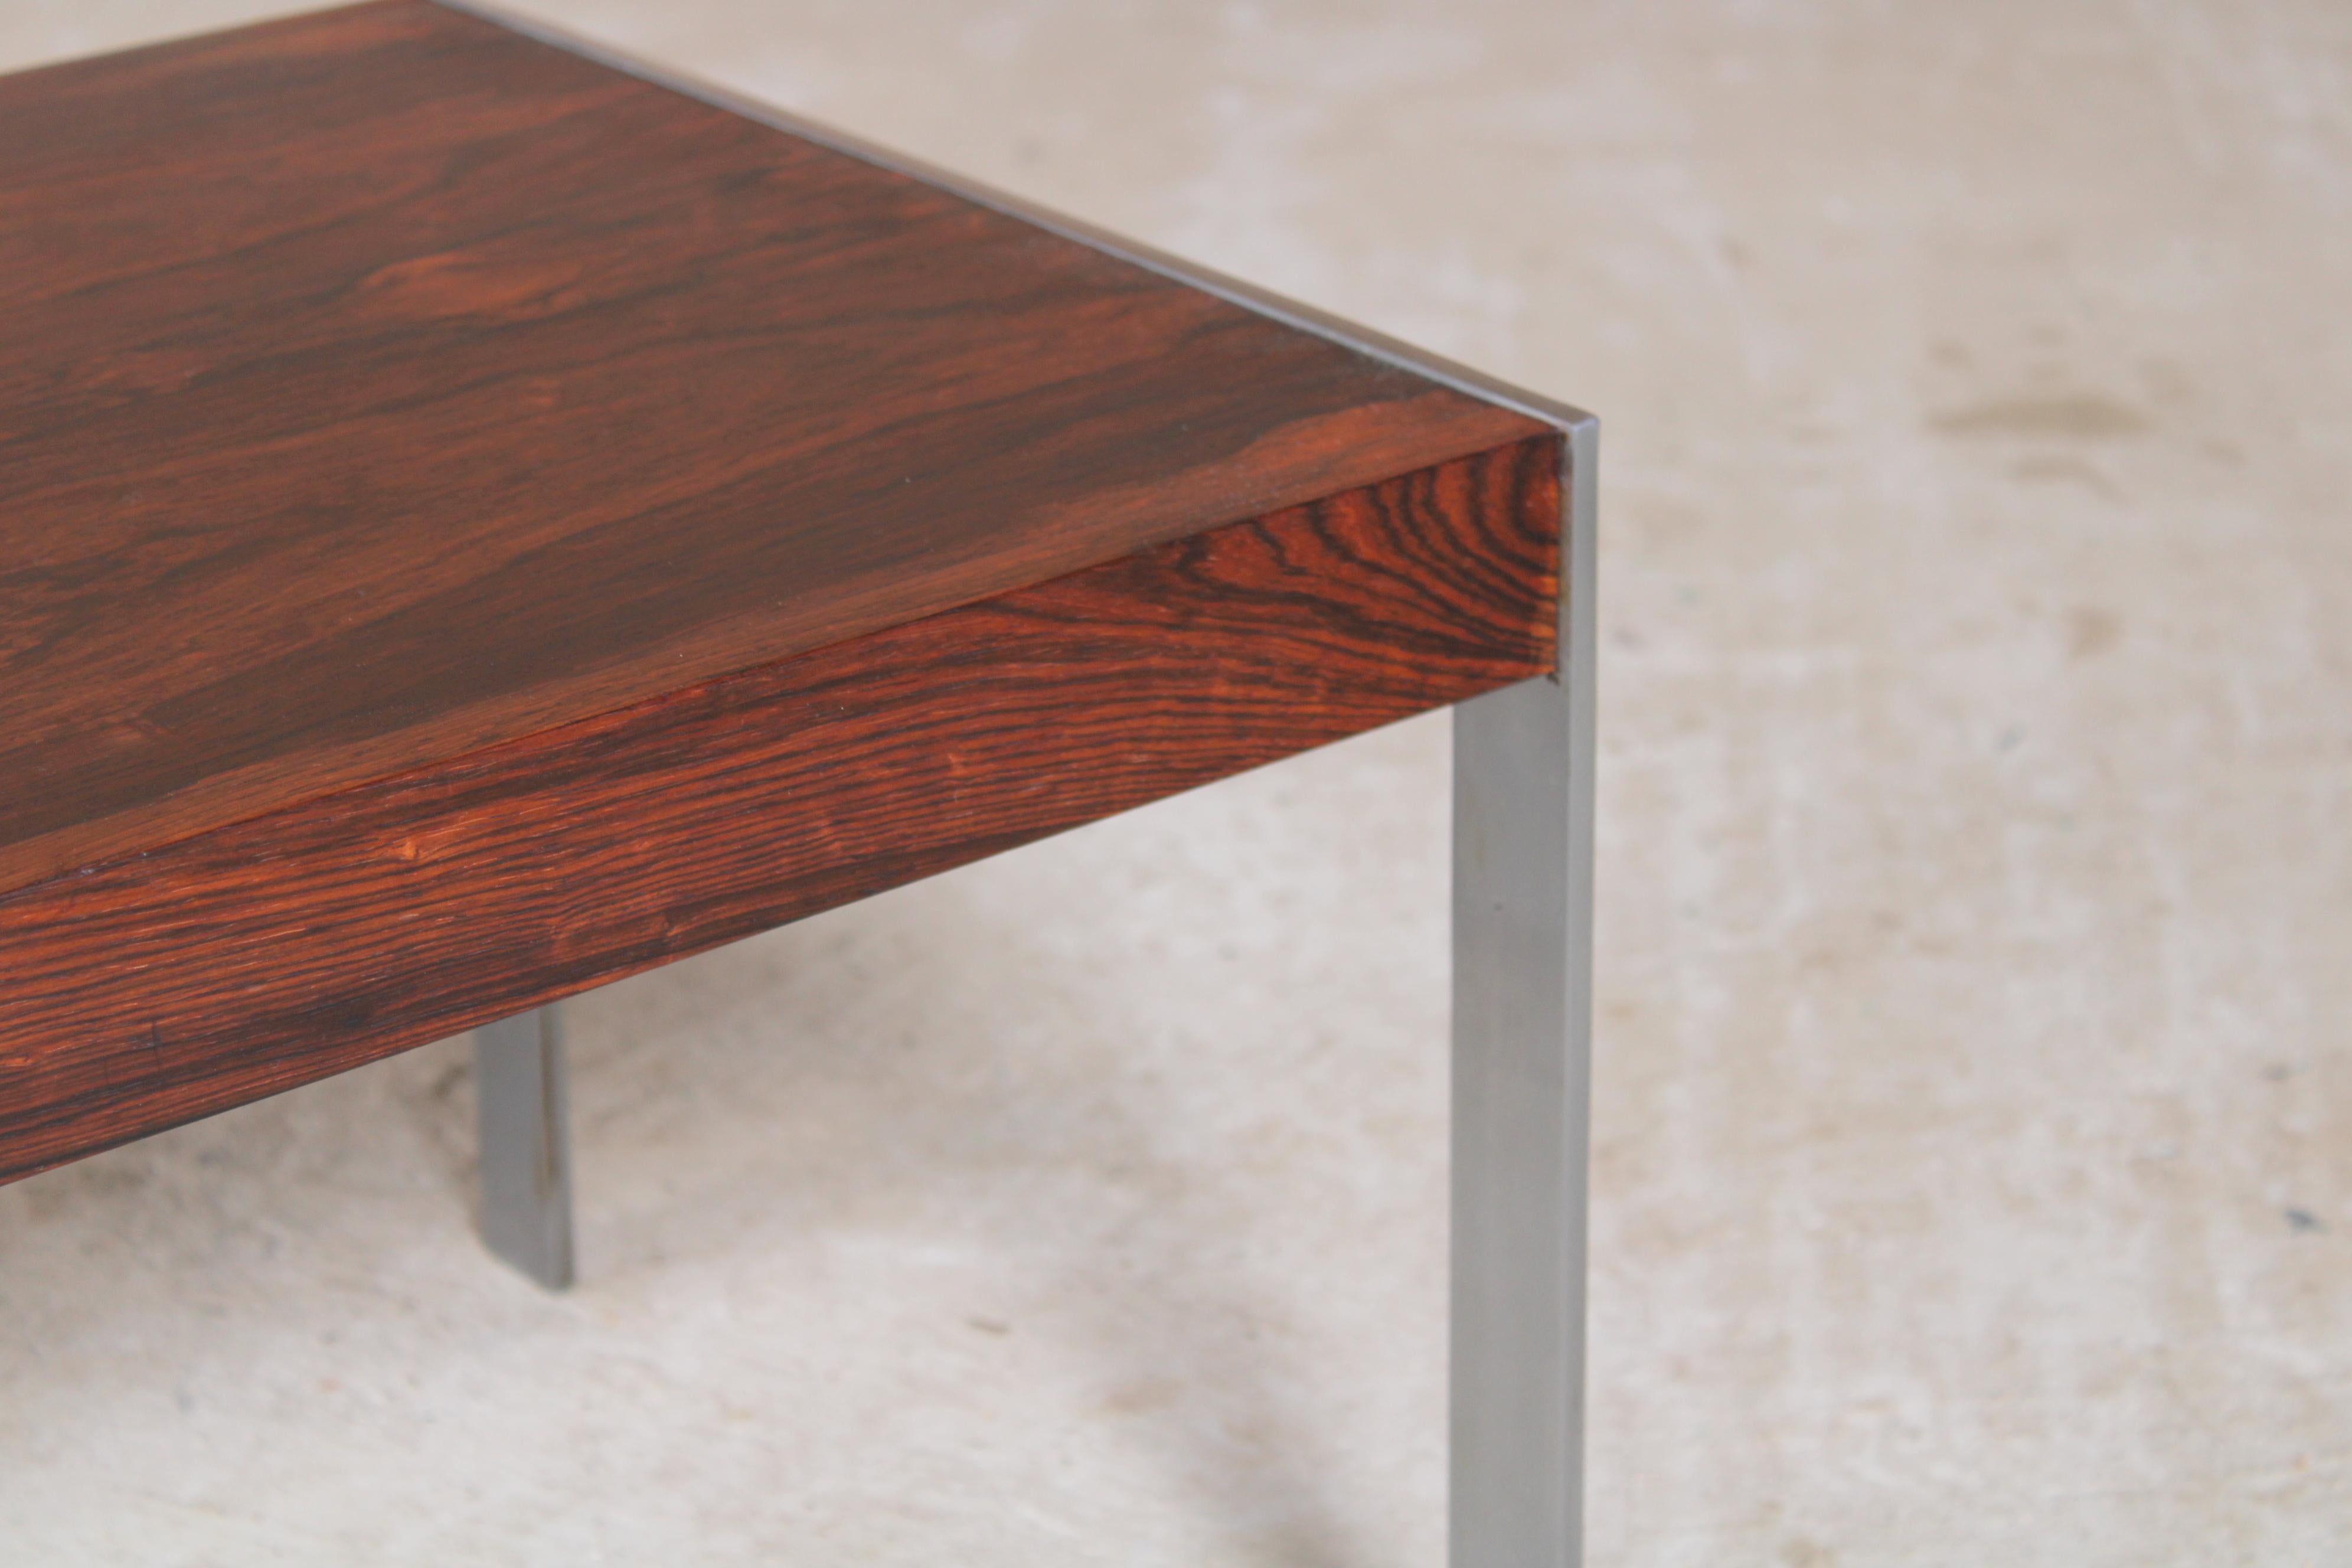 20th Century Mid Century Rosewood Coffee Table by Richard Young for Merrow Associates